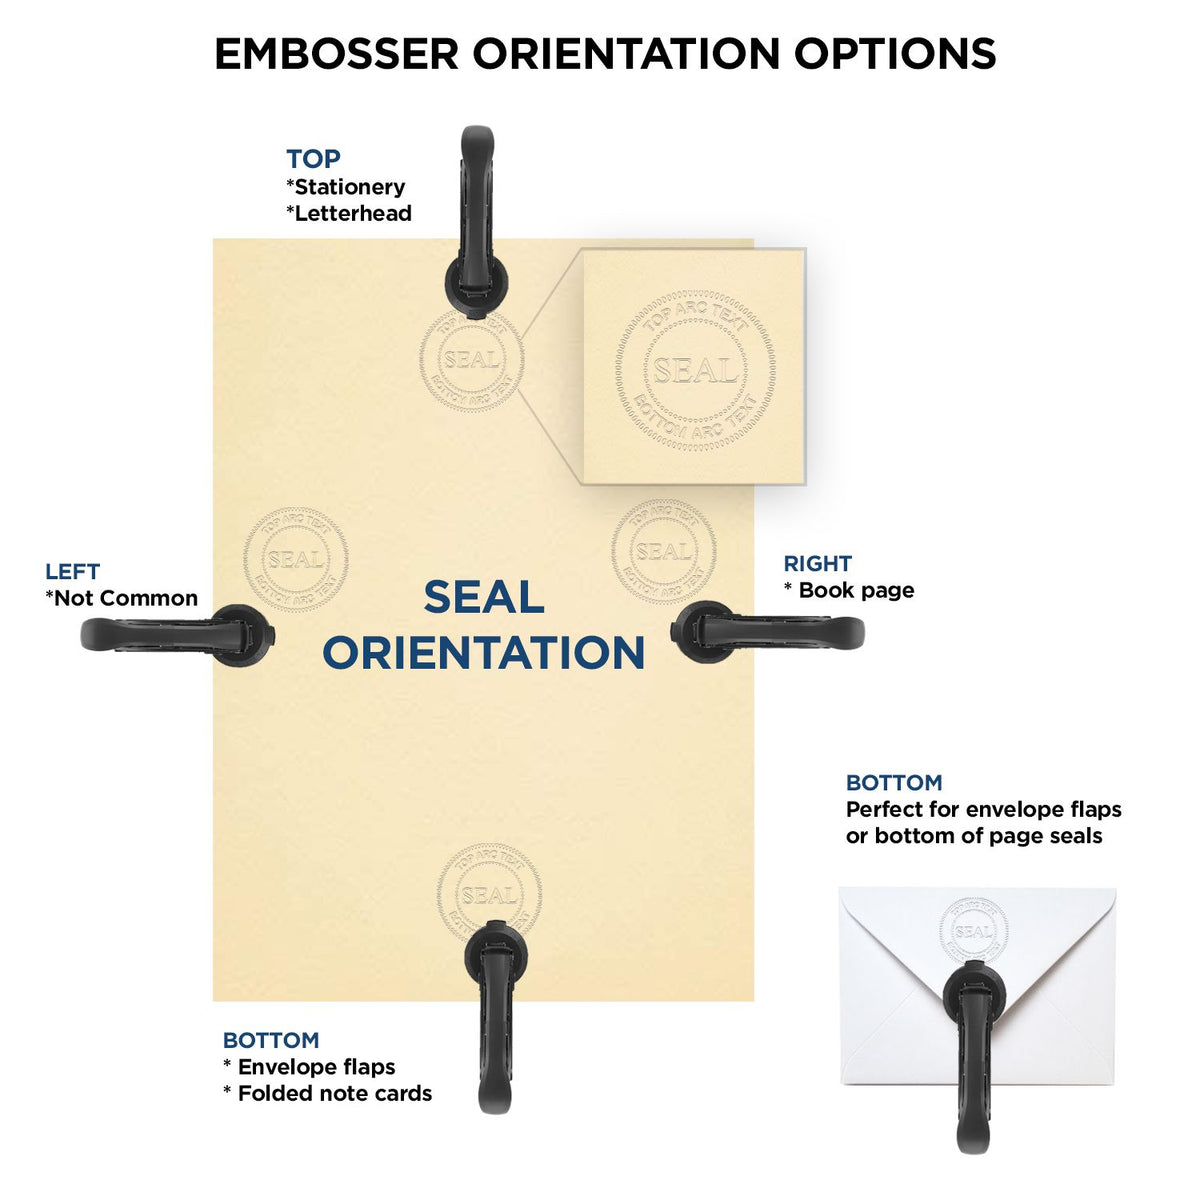 An infographic for the Heavy Duty Cast Iron Delaware Land Surveyor Seal Embosser showing embosser orientation, this is showing examples of a top, bottom, right and left insert.